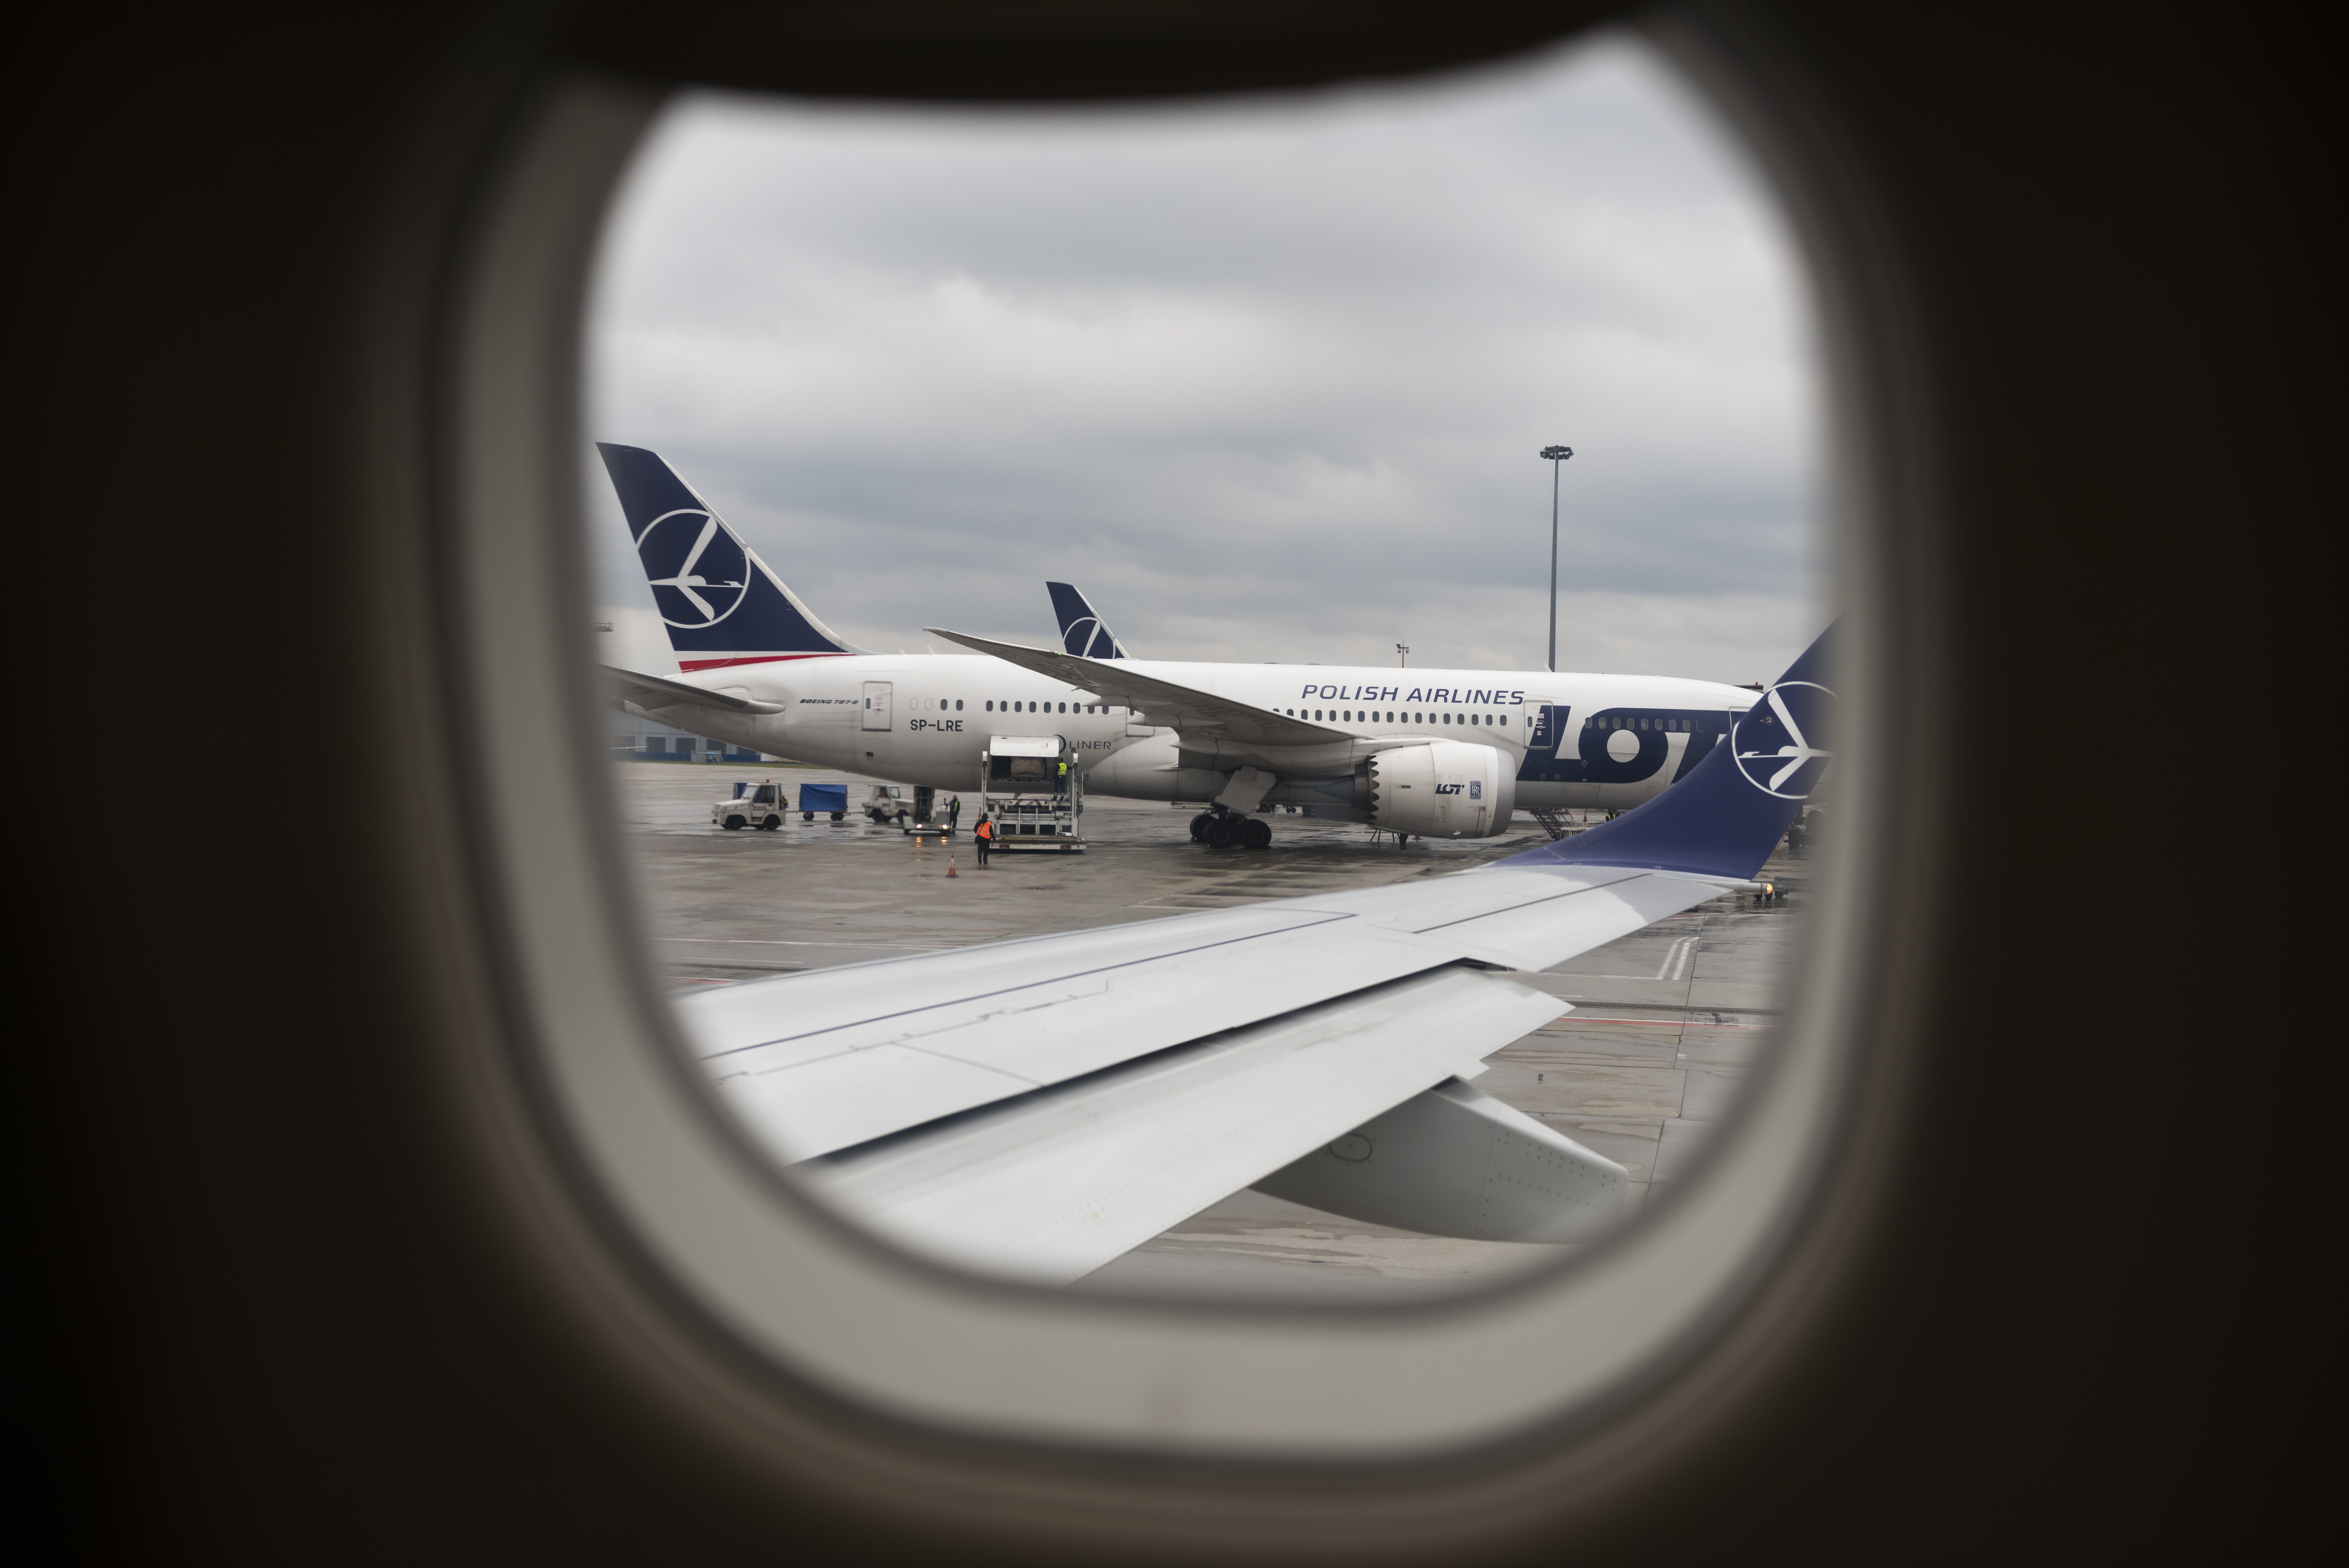 LOT-Polish airlines fleet  Passenger aircraft, Aviation airplane, Airlines